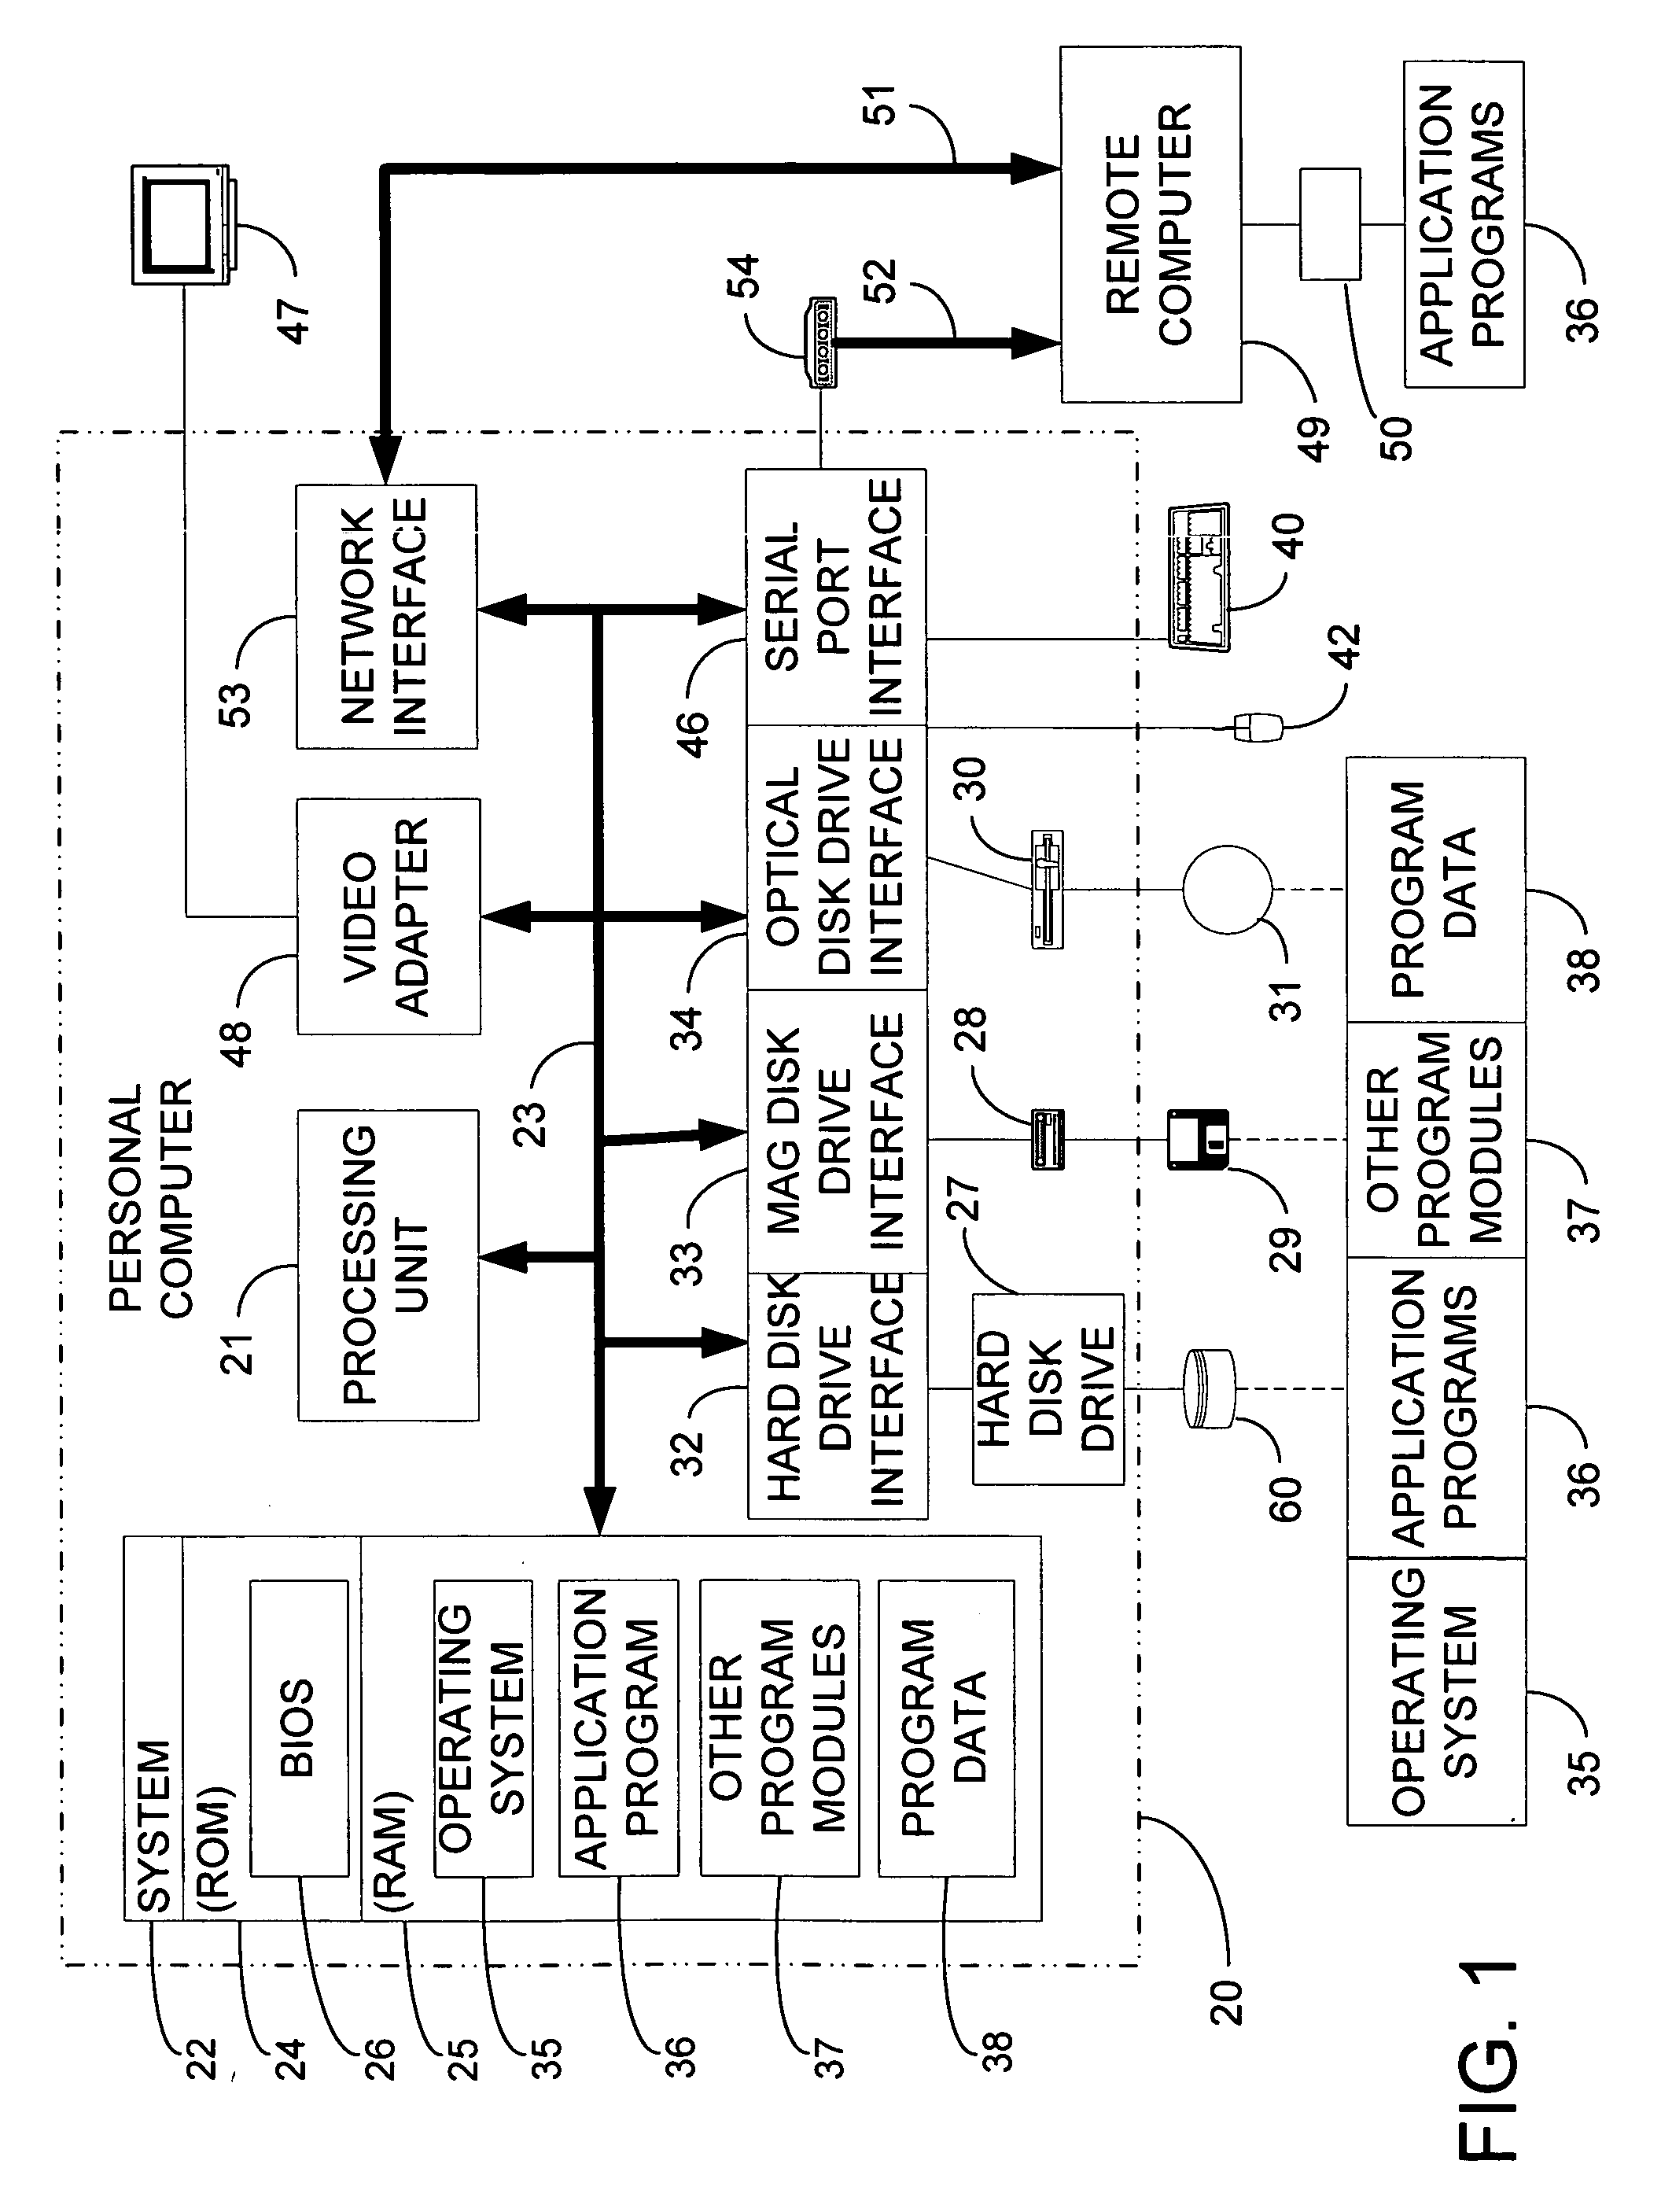 Method of achieving high color fidelity in a digital image capture device and a capture device incorporating same